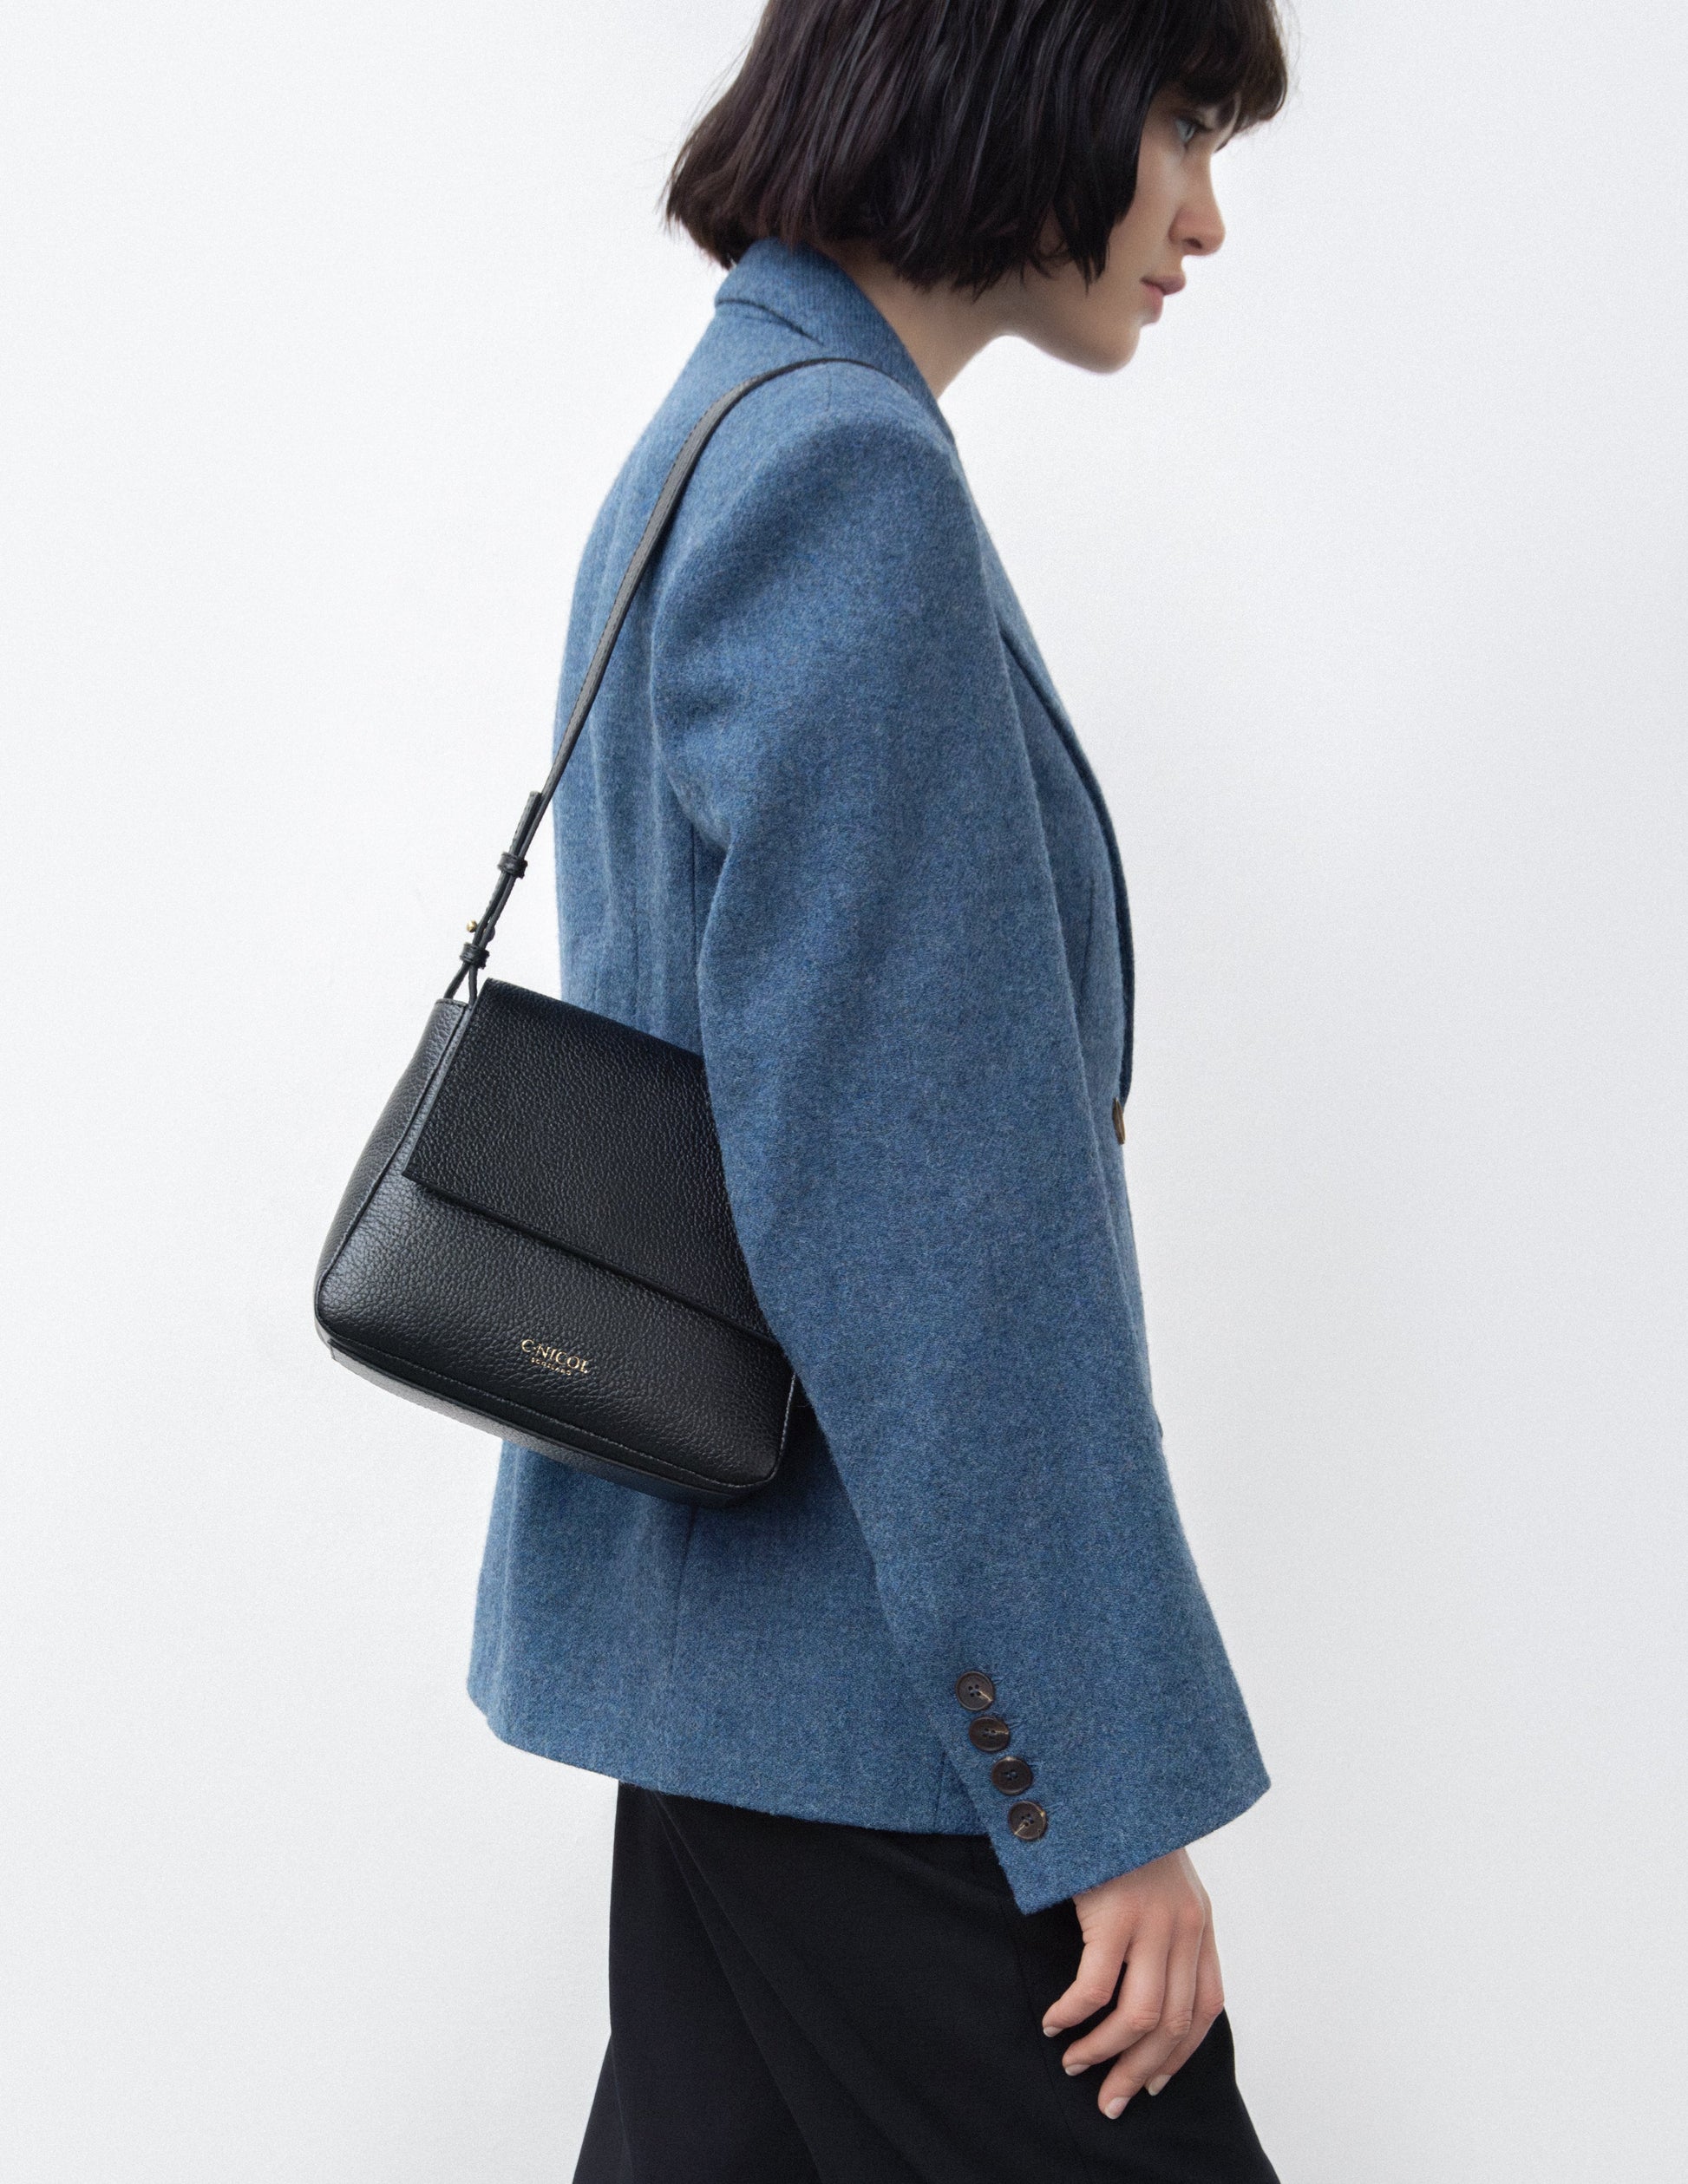 CNicol Black Leather Bag worn by model facing sideways in a blue suit jacket and black trousers